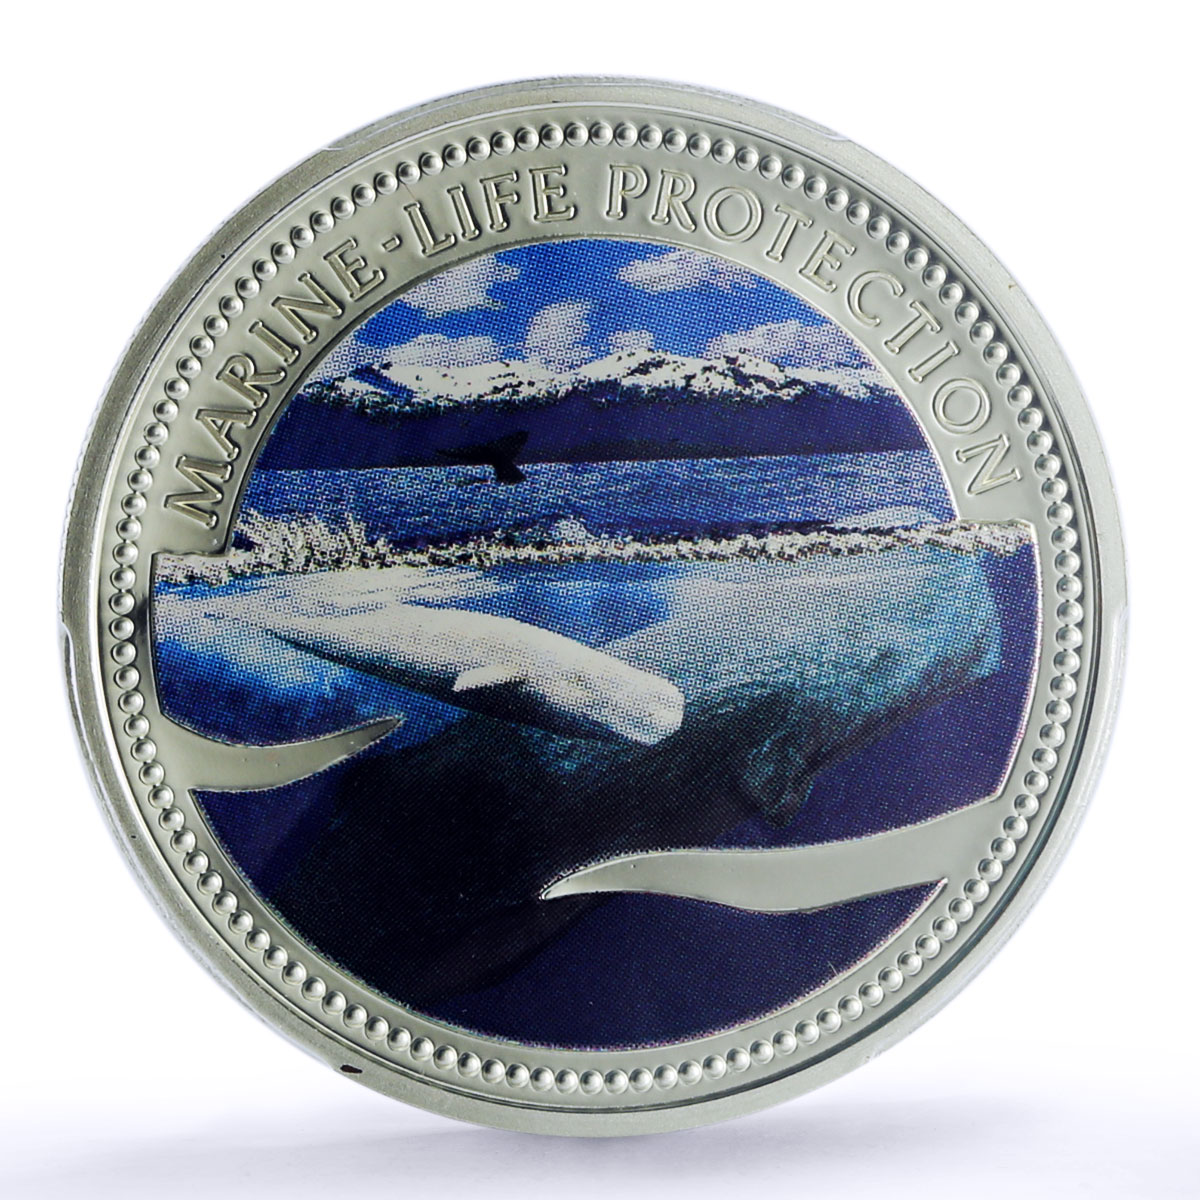 Palau 5 dollars Marine Life Protection Whales PR68 PCGS silver coin 2002